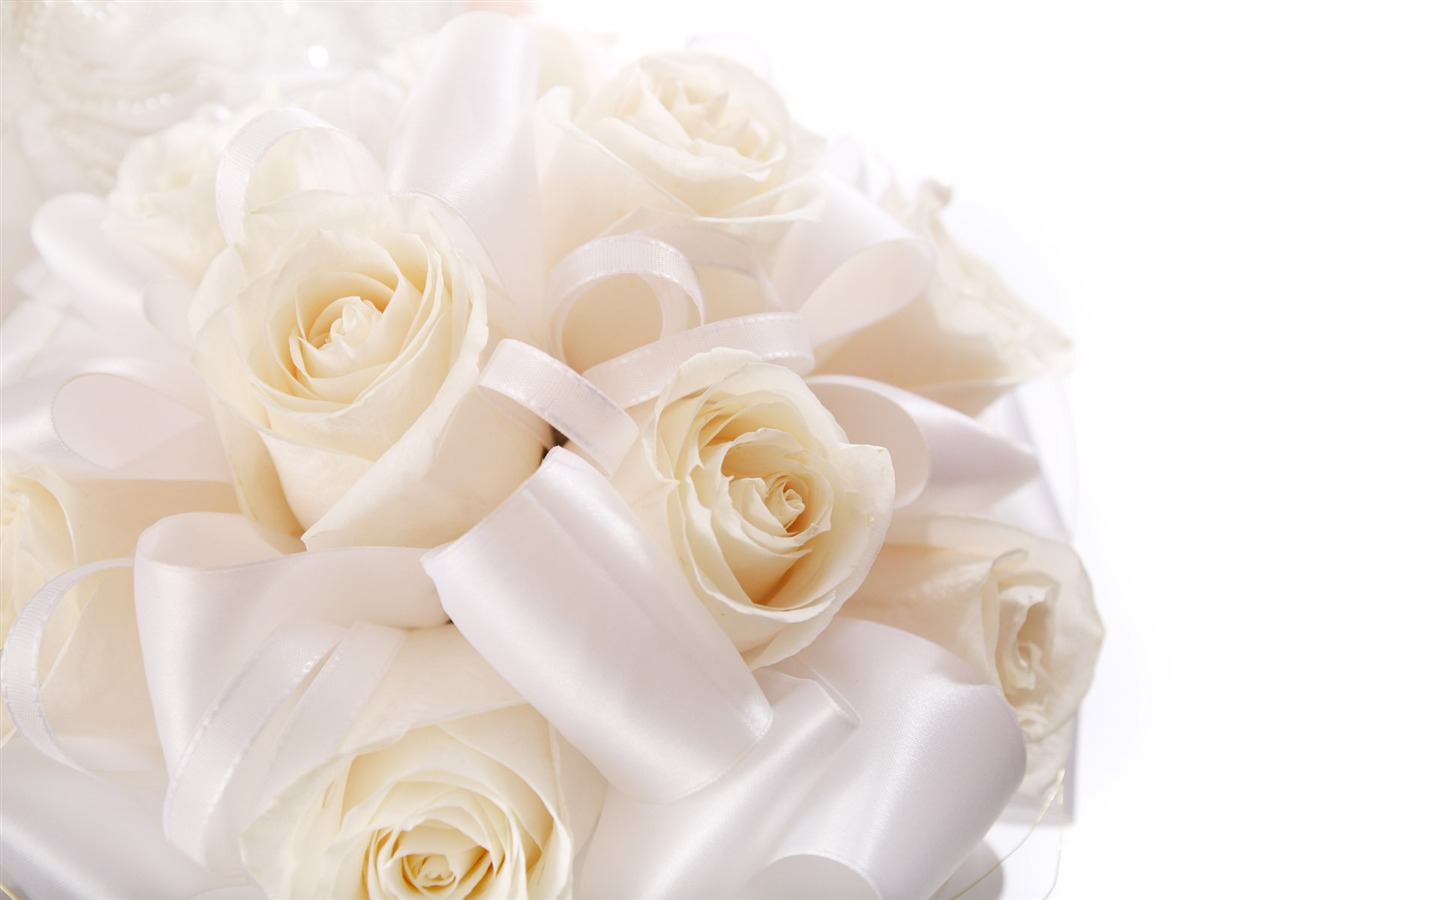 Weddings and Flowers wallpaper (1) #4 - 1440x900